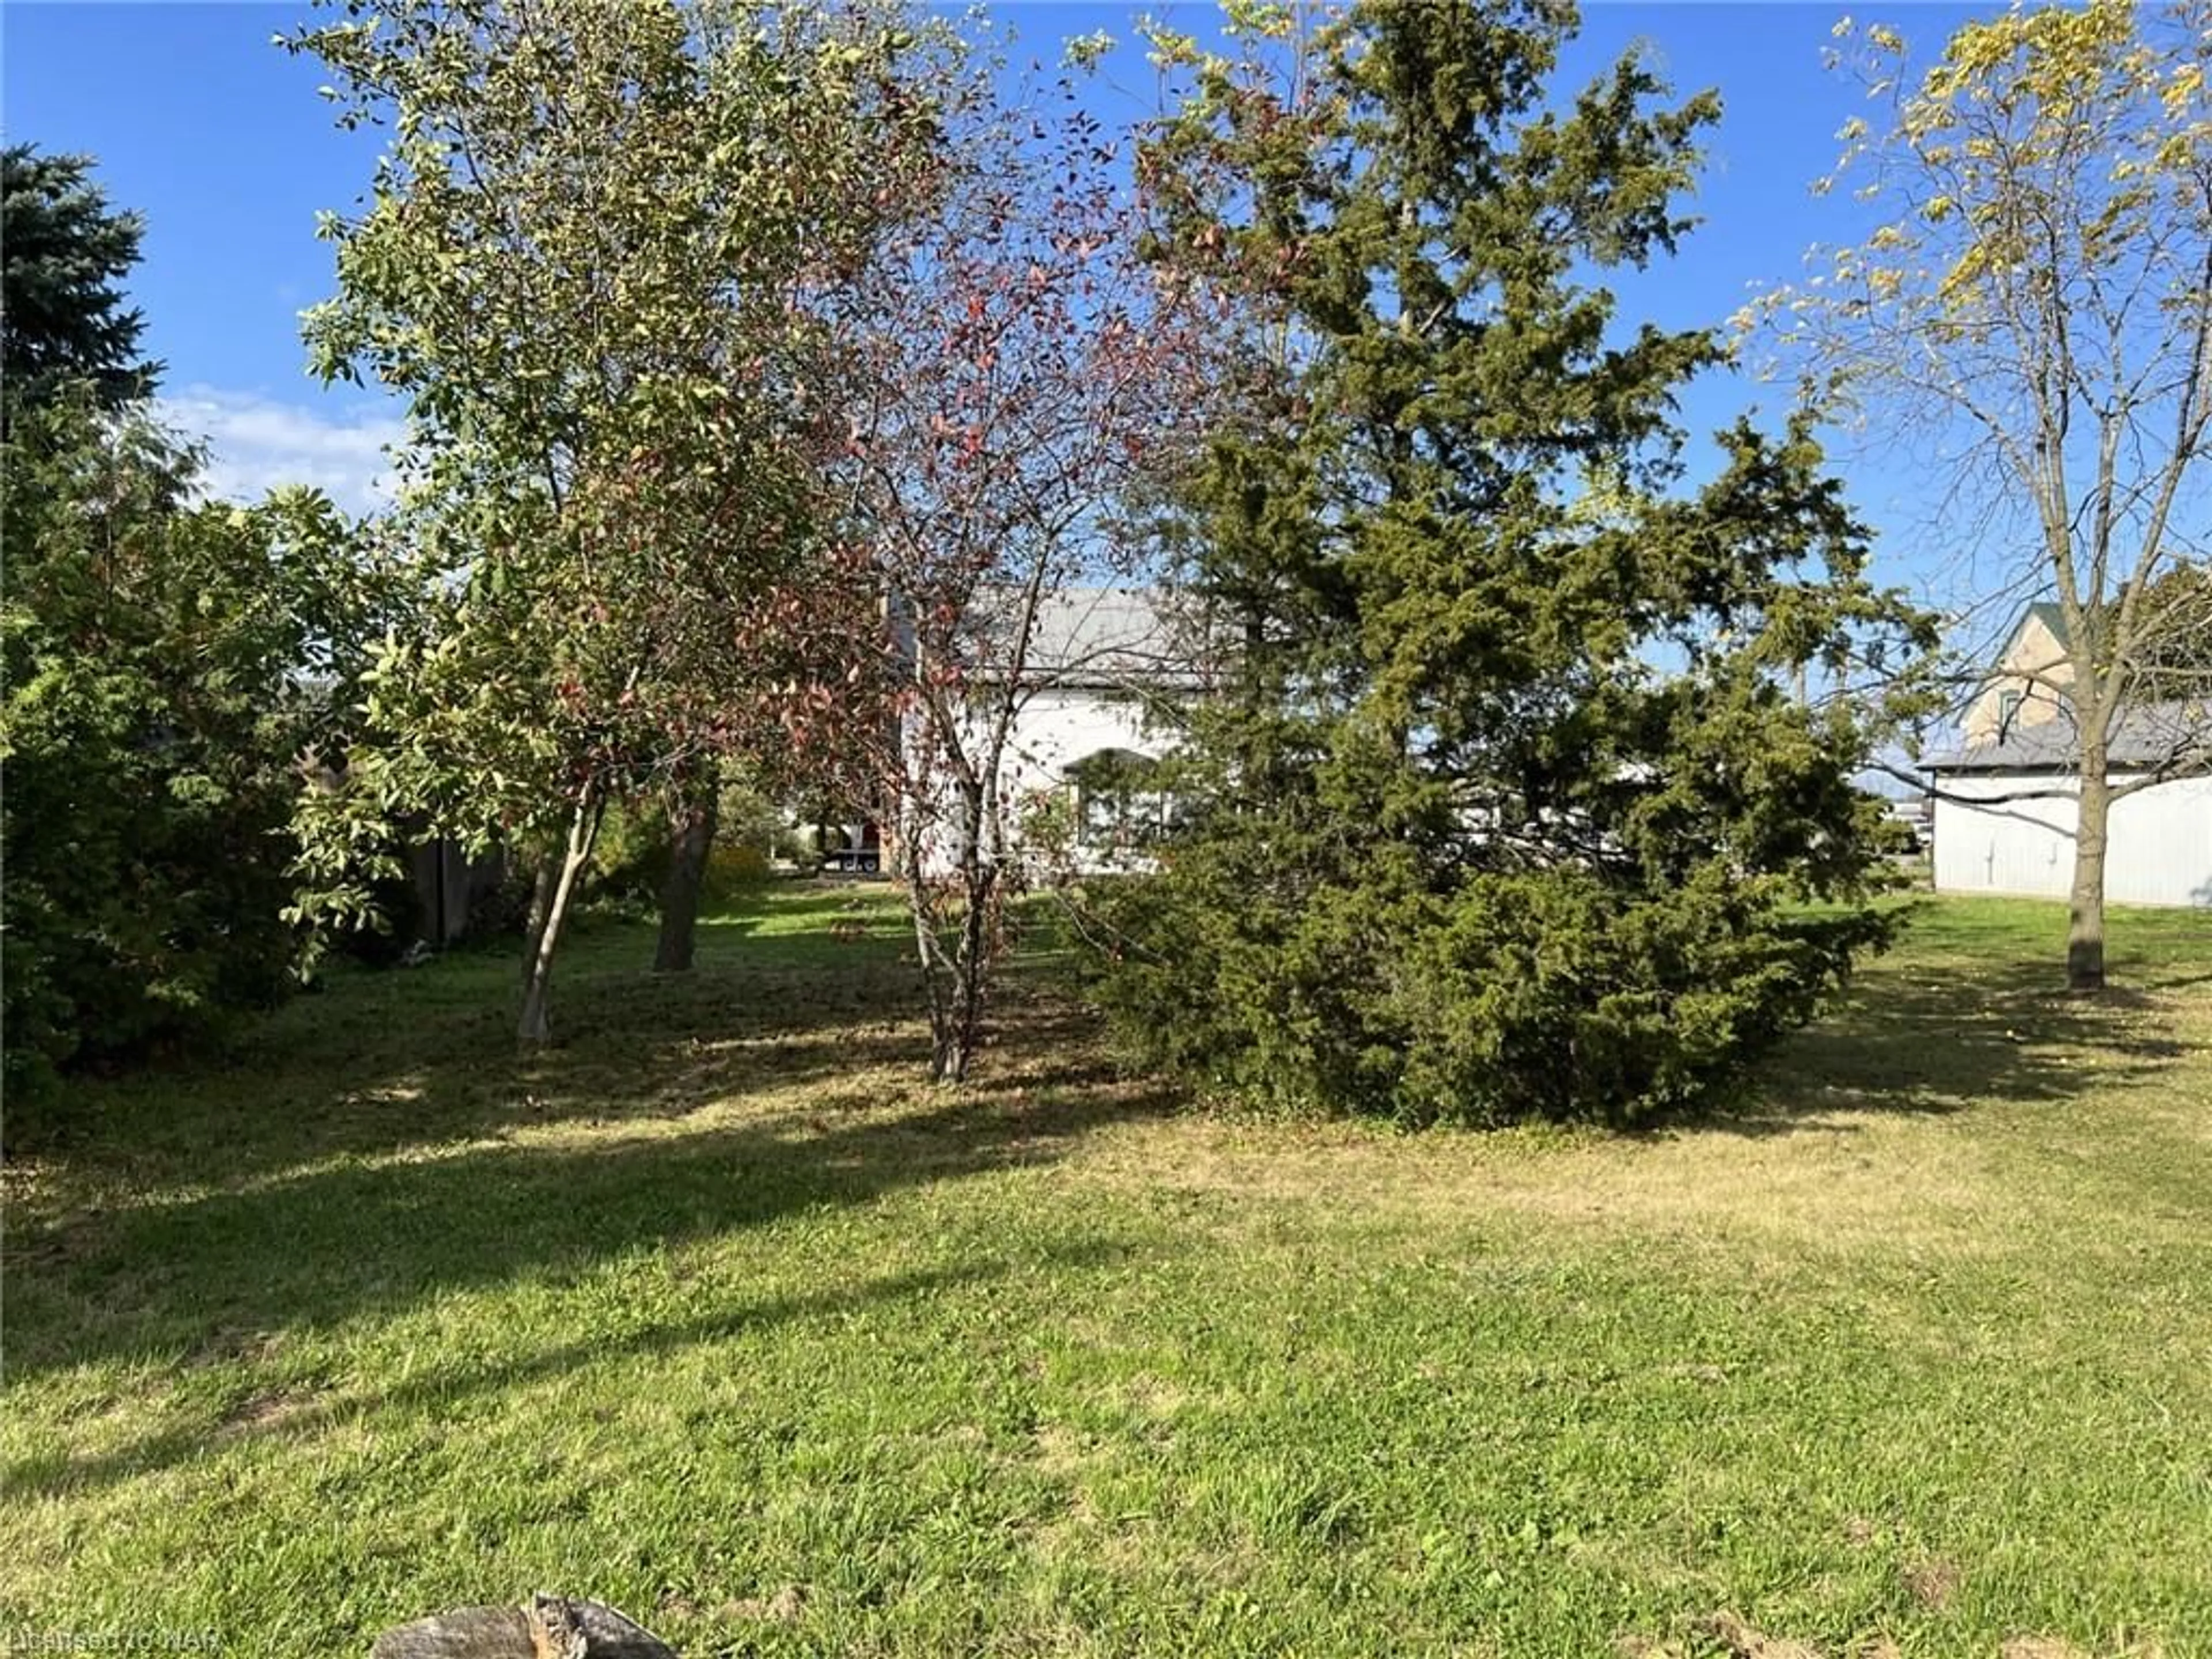 Fenced yard for 4172 Linden Ave, Campden Ontario L0R 2G0